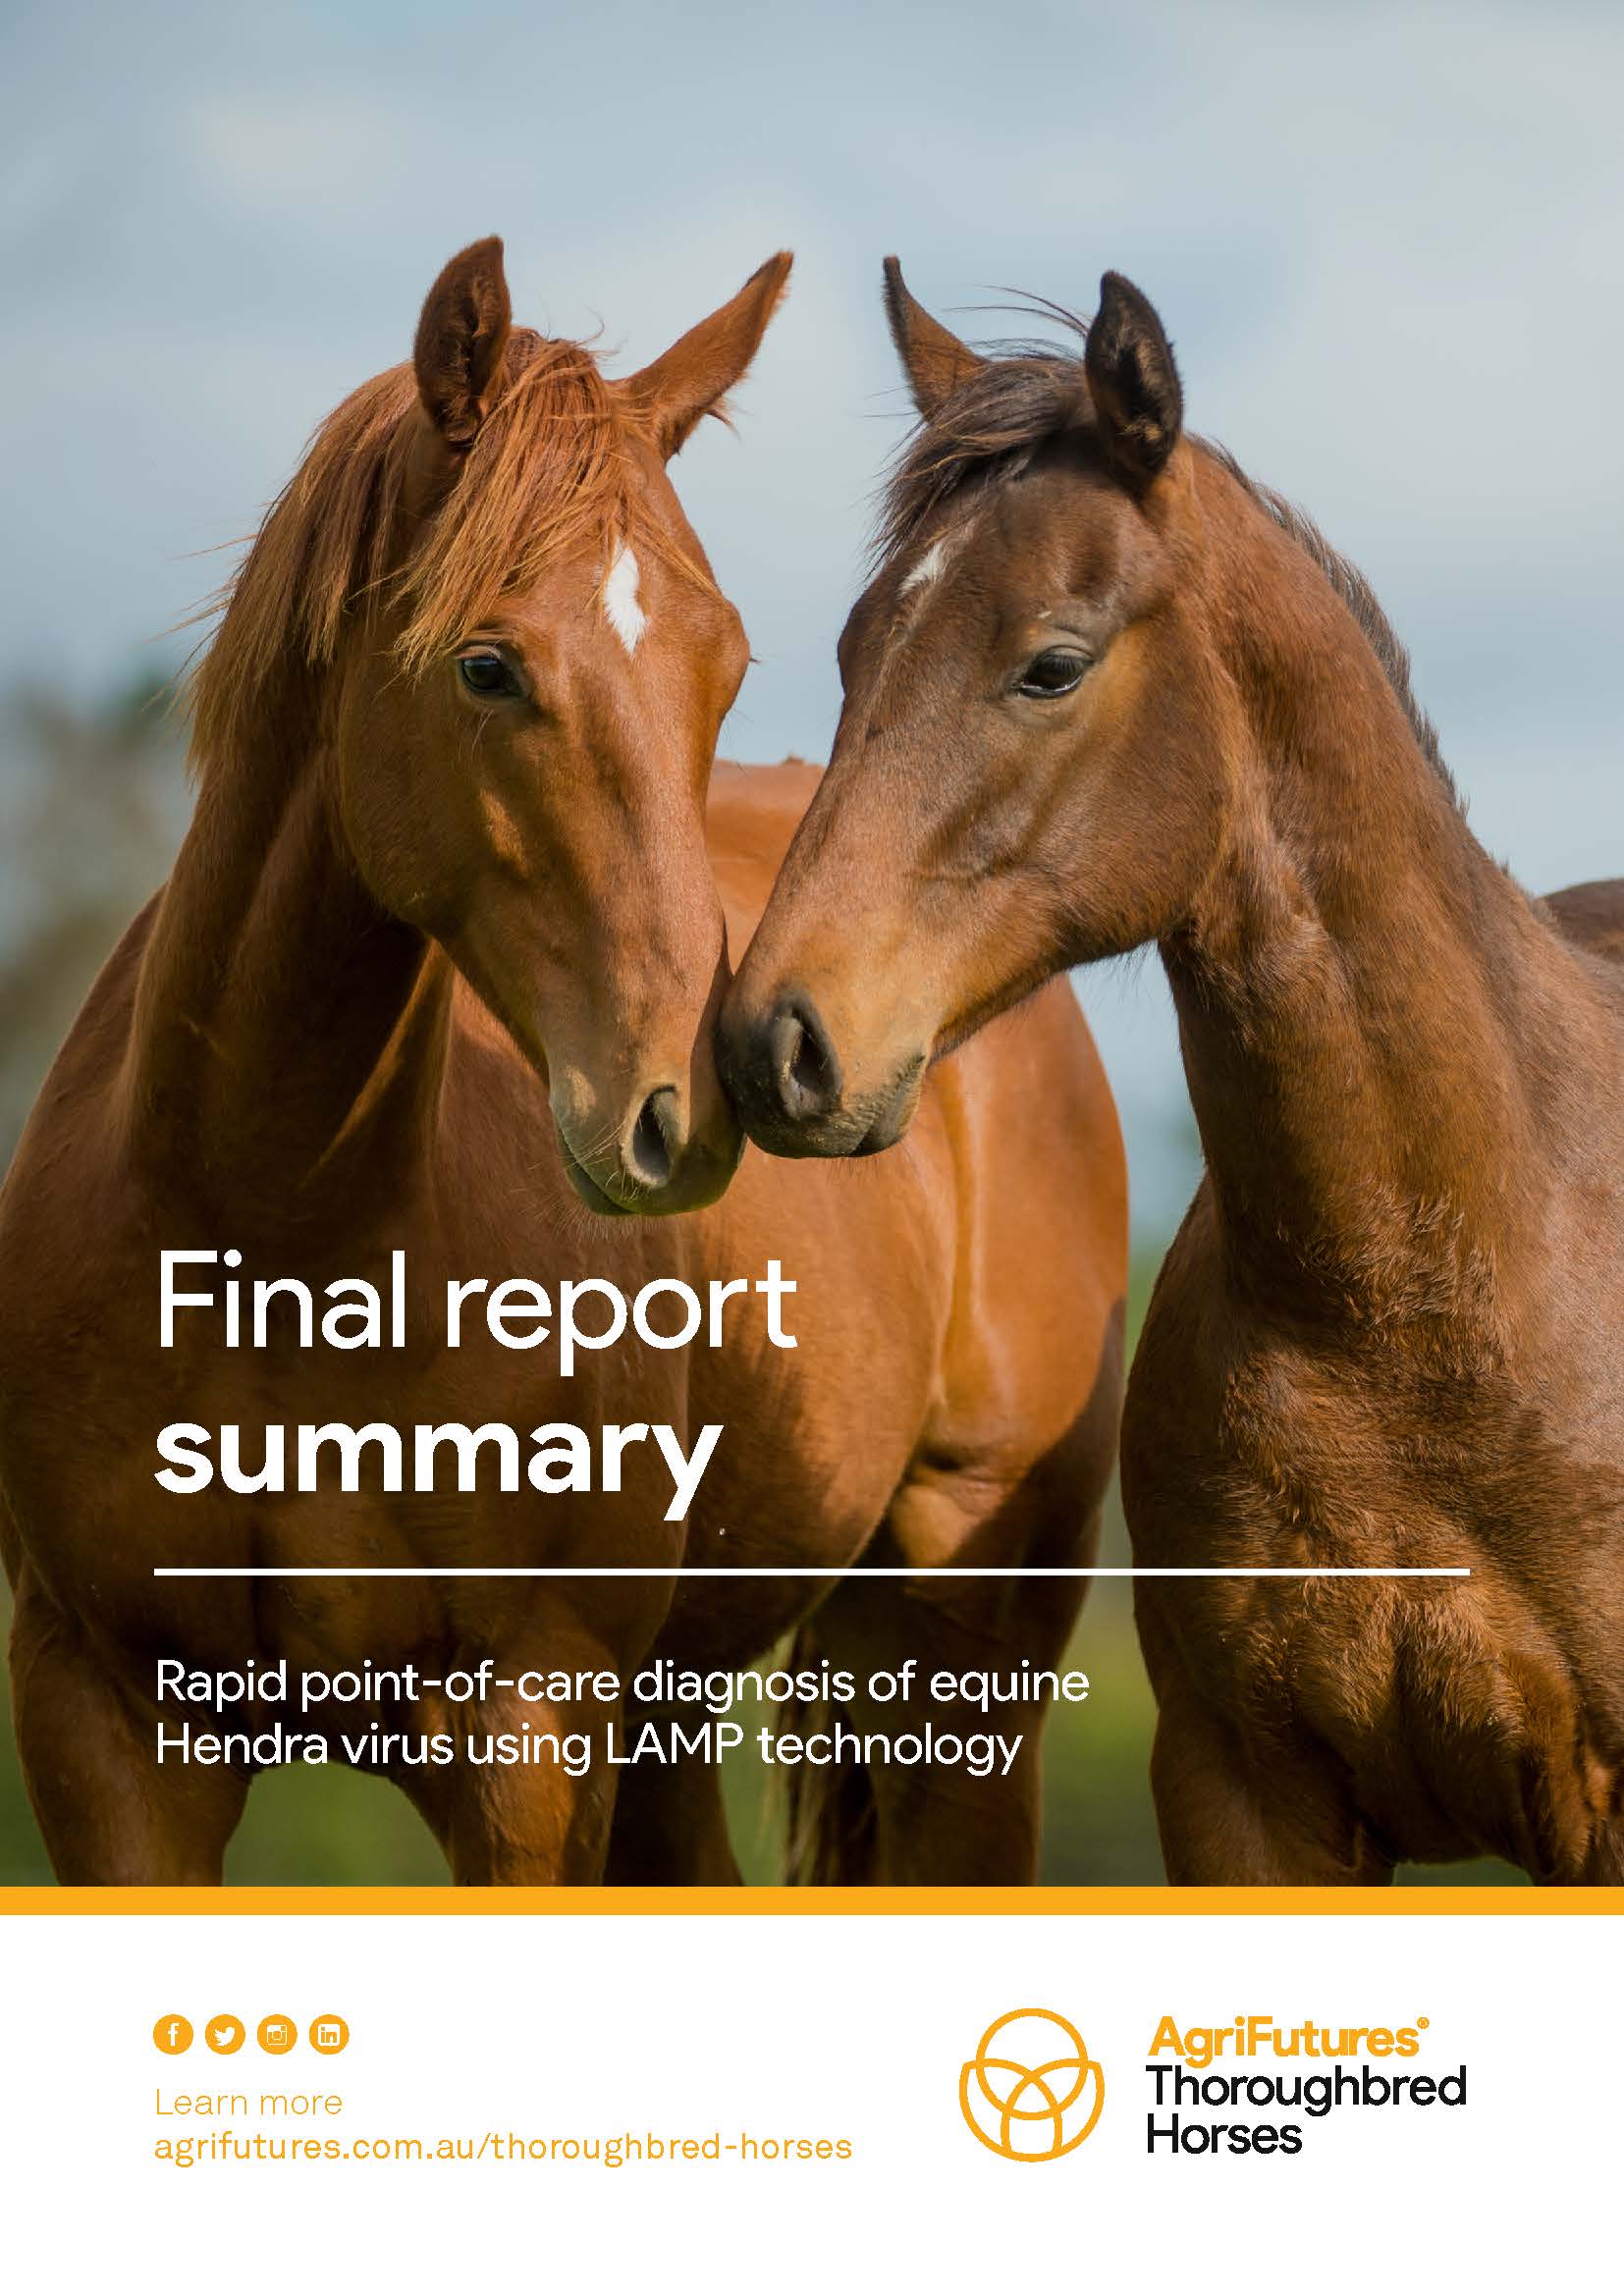 Final report summary: Rapid point-of-care diagnosis of equine Hendra virus using LAMP technology - image